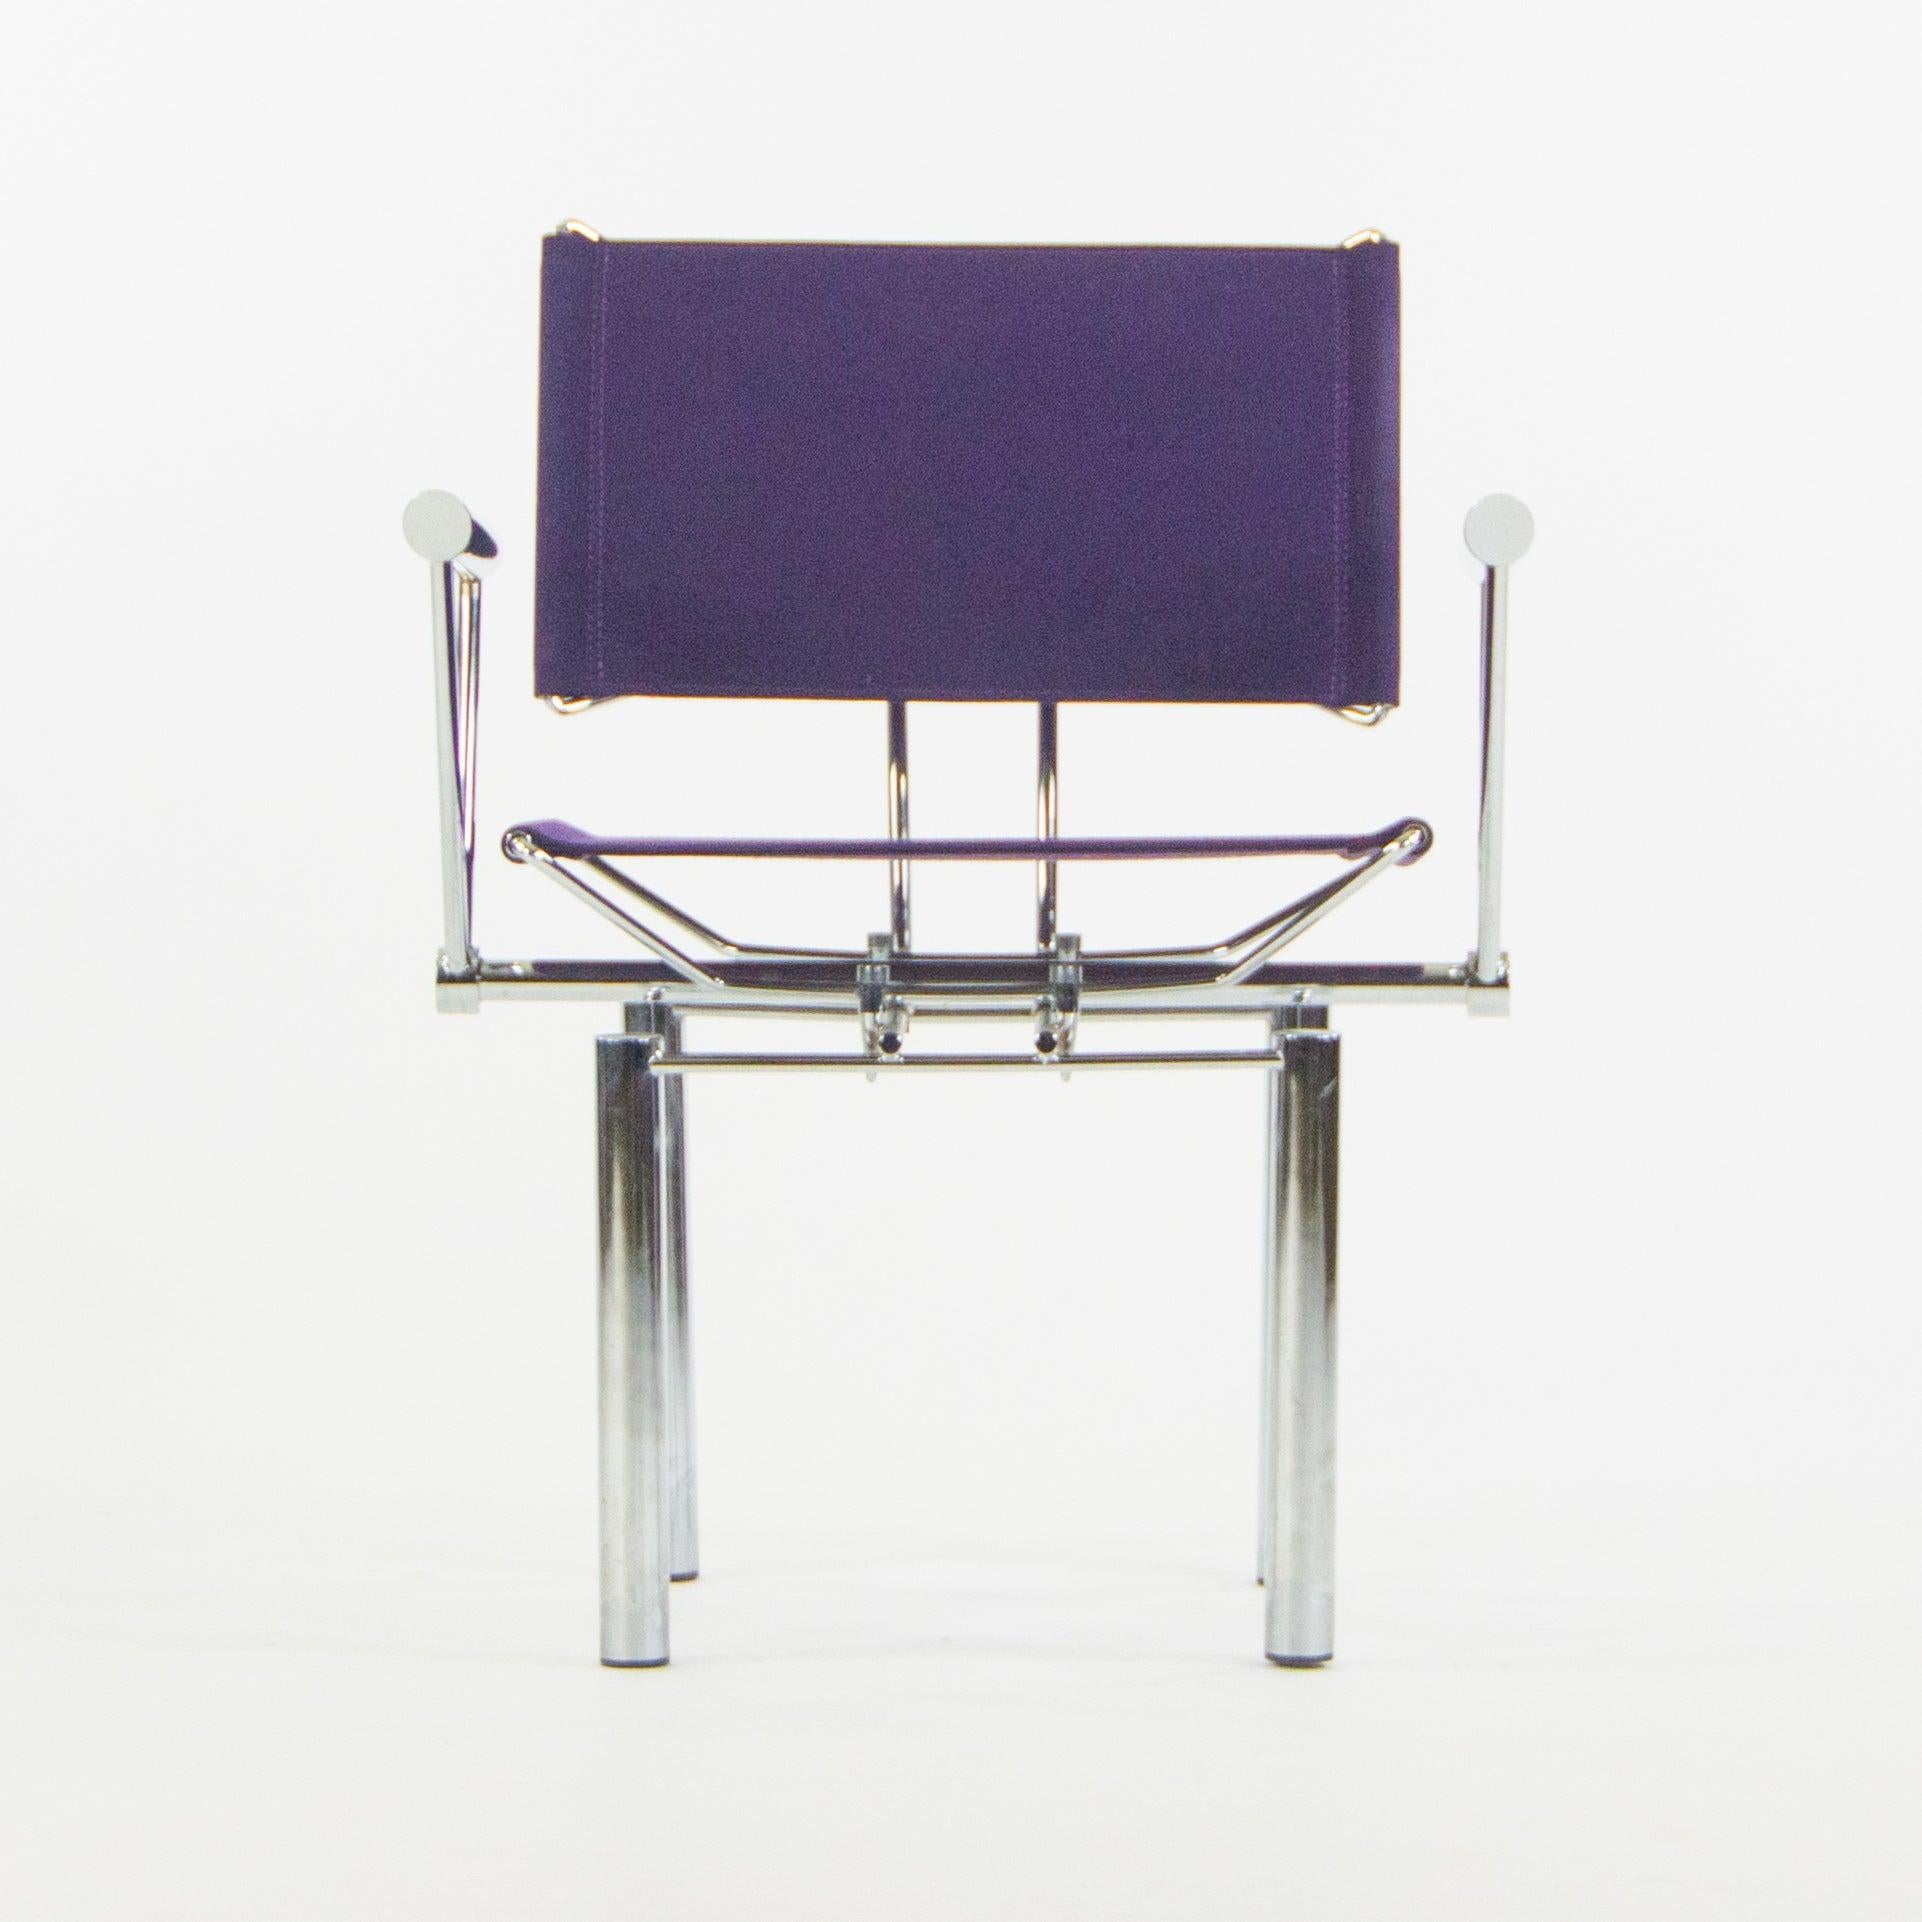 Listed for sale are a pair of 1980's Hans Ullrich Bitsch for Kusch+Co purple fabric dining chairs from the 8600 series. They are constructed from beautifully chromed steel with intricate detail work. 
You will receive the exact pair shown in photos.